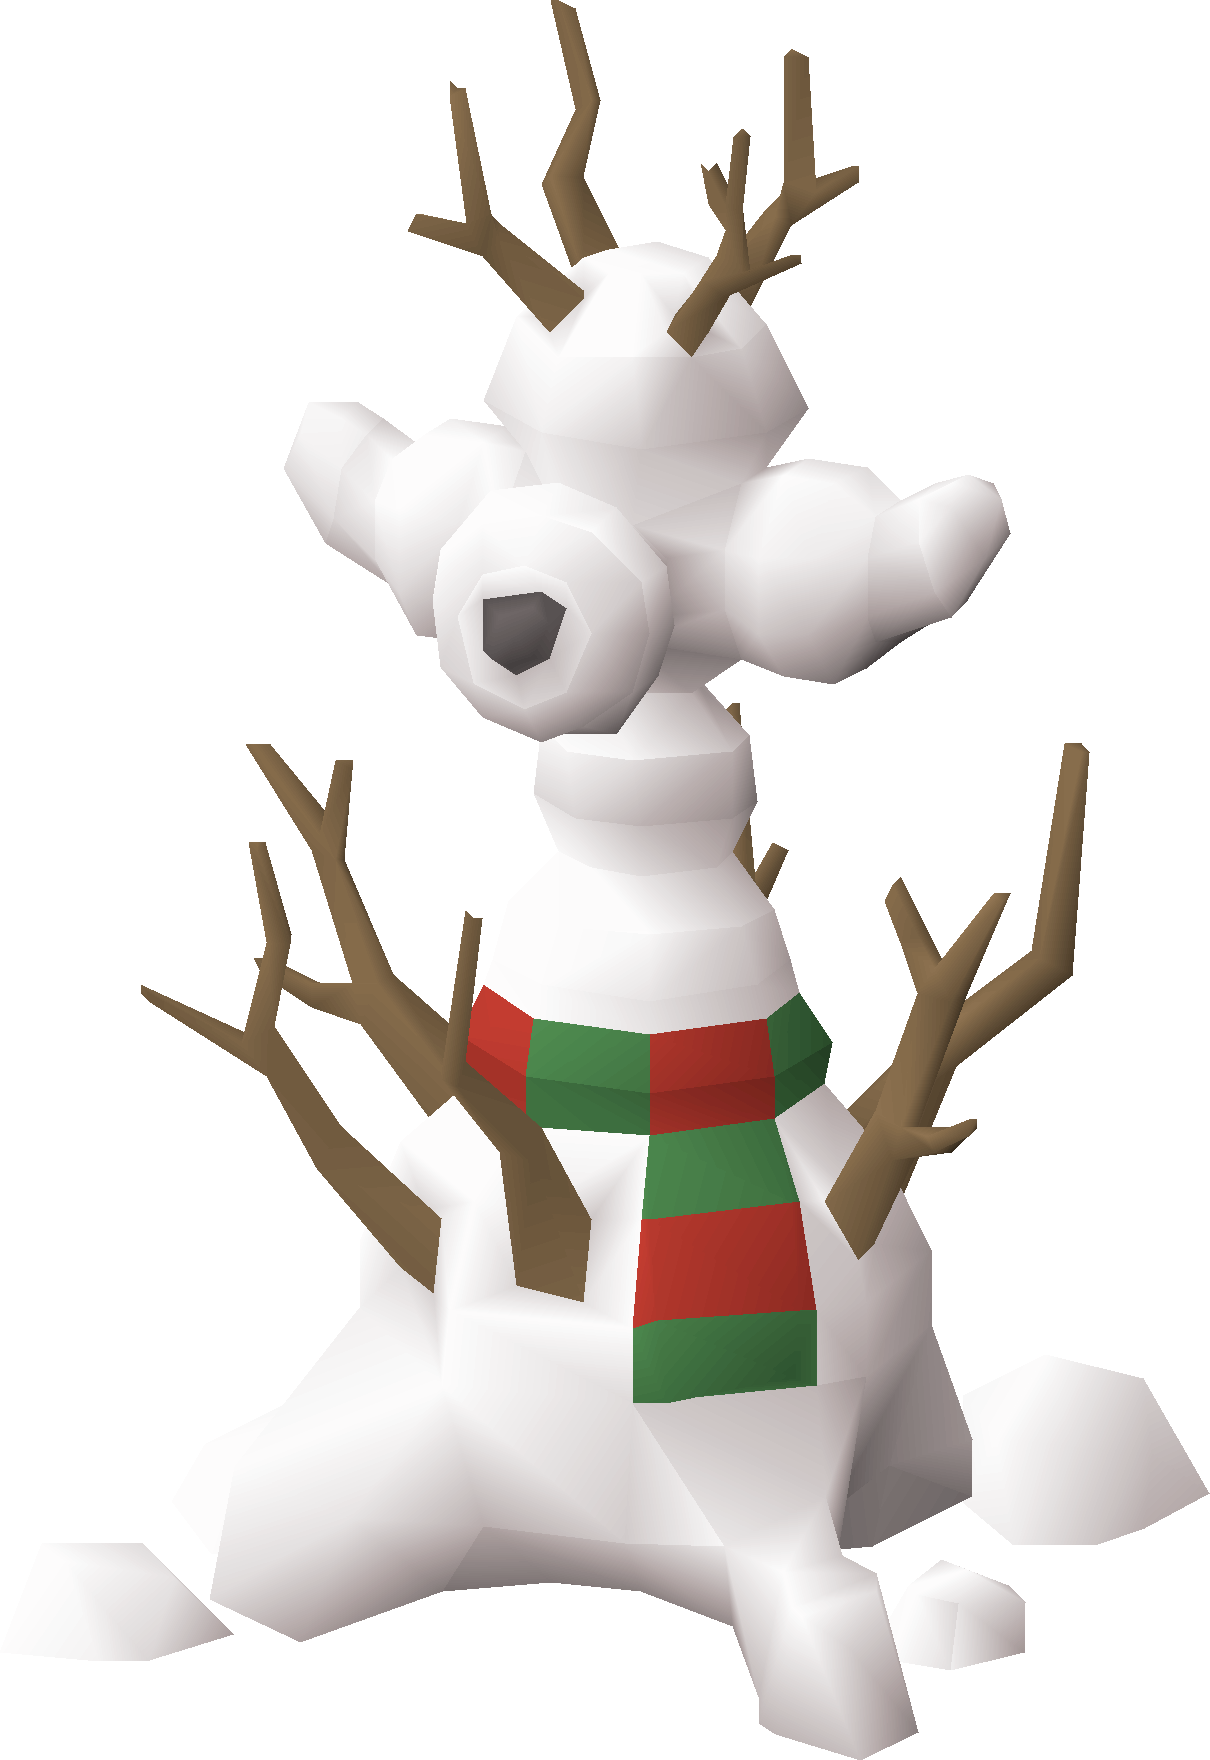 A player transformed into a Thermy snowman.